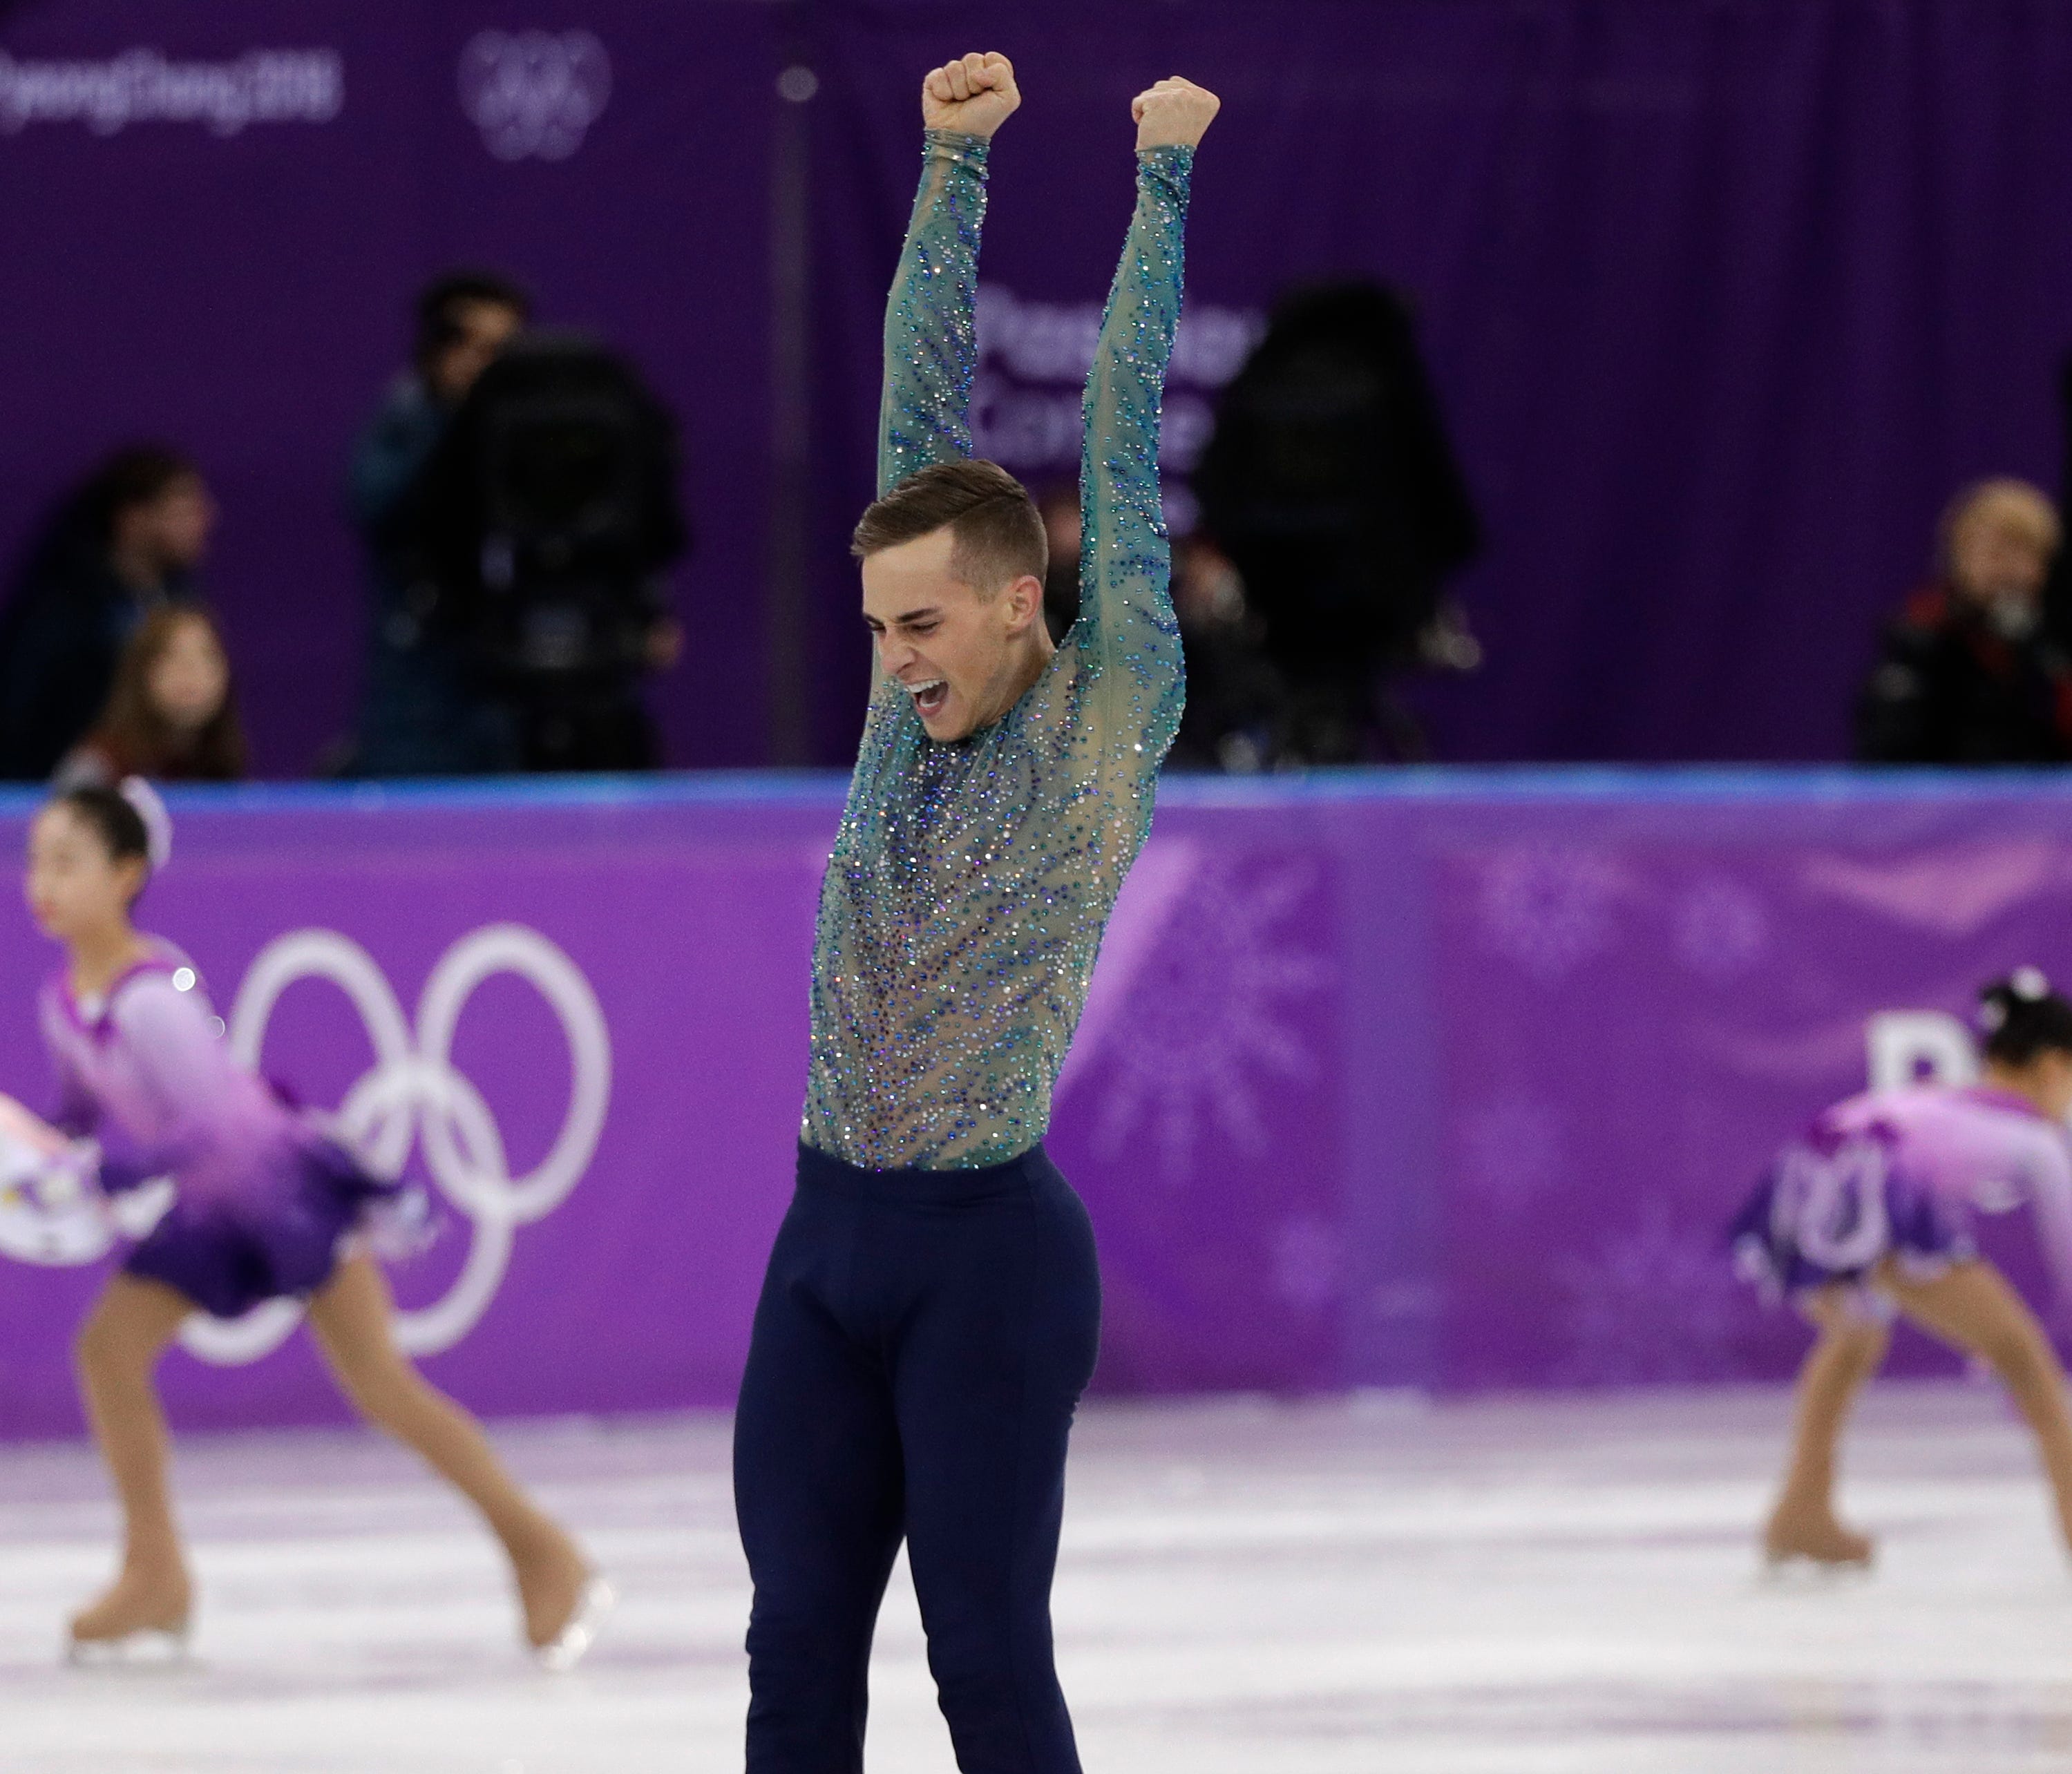 Adam Rippon of the United States reacts following his performance in the men's free figure skating final in the Gangneung Ice Arena at the 2018 Winter Olympics in Gangneung, South Korea, Saturday, Feb. 17, 2018. (AP Photo/David J. Phillip)